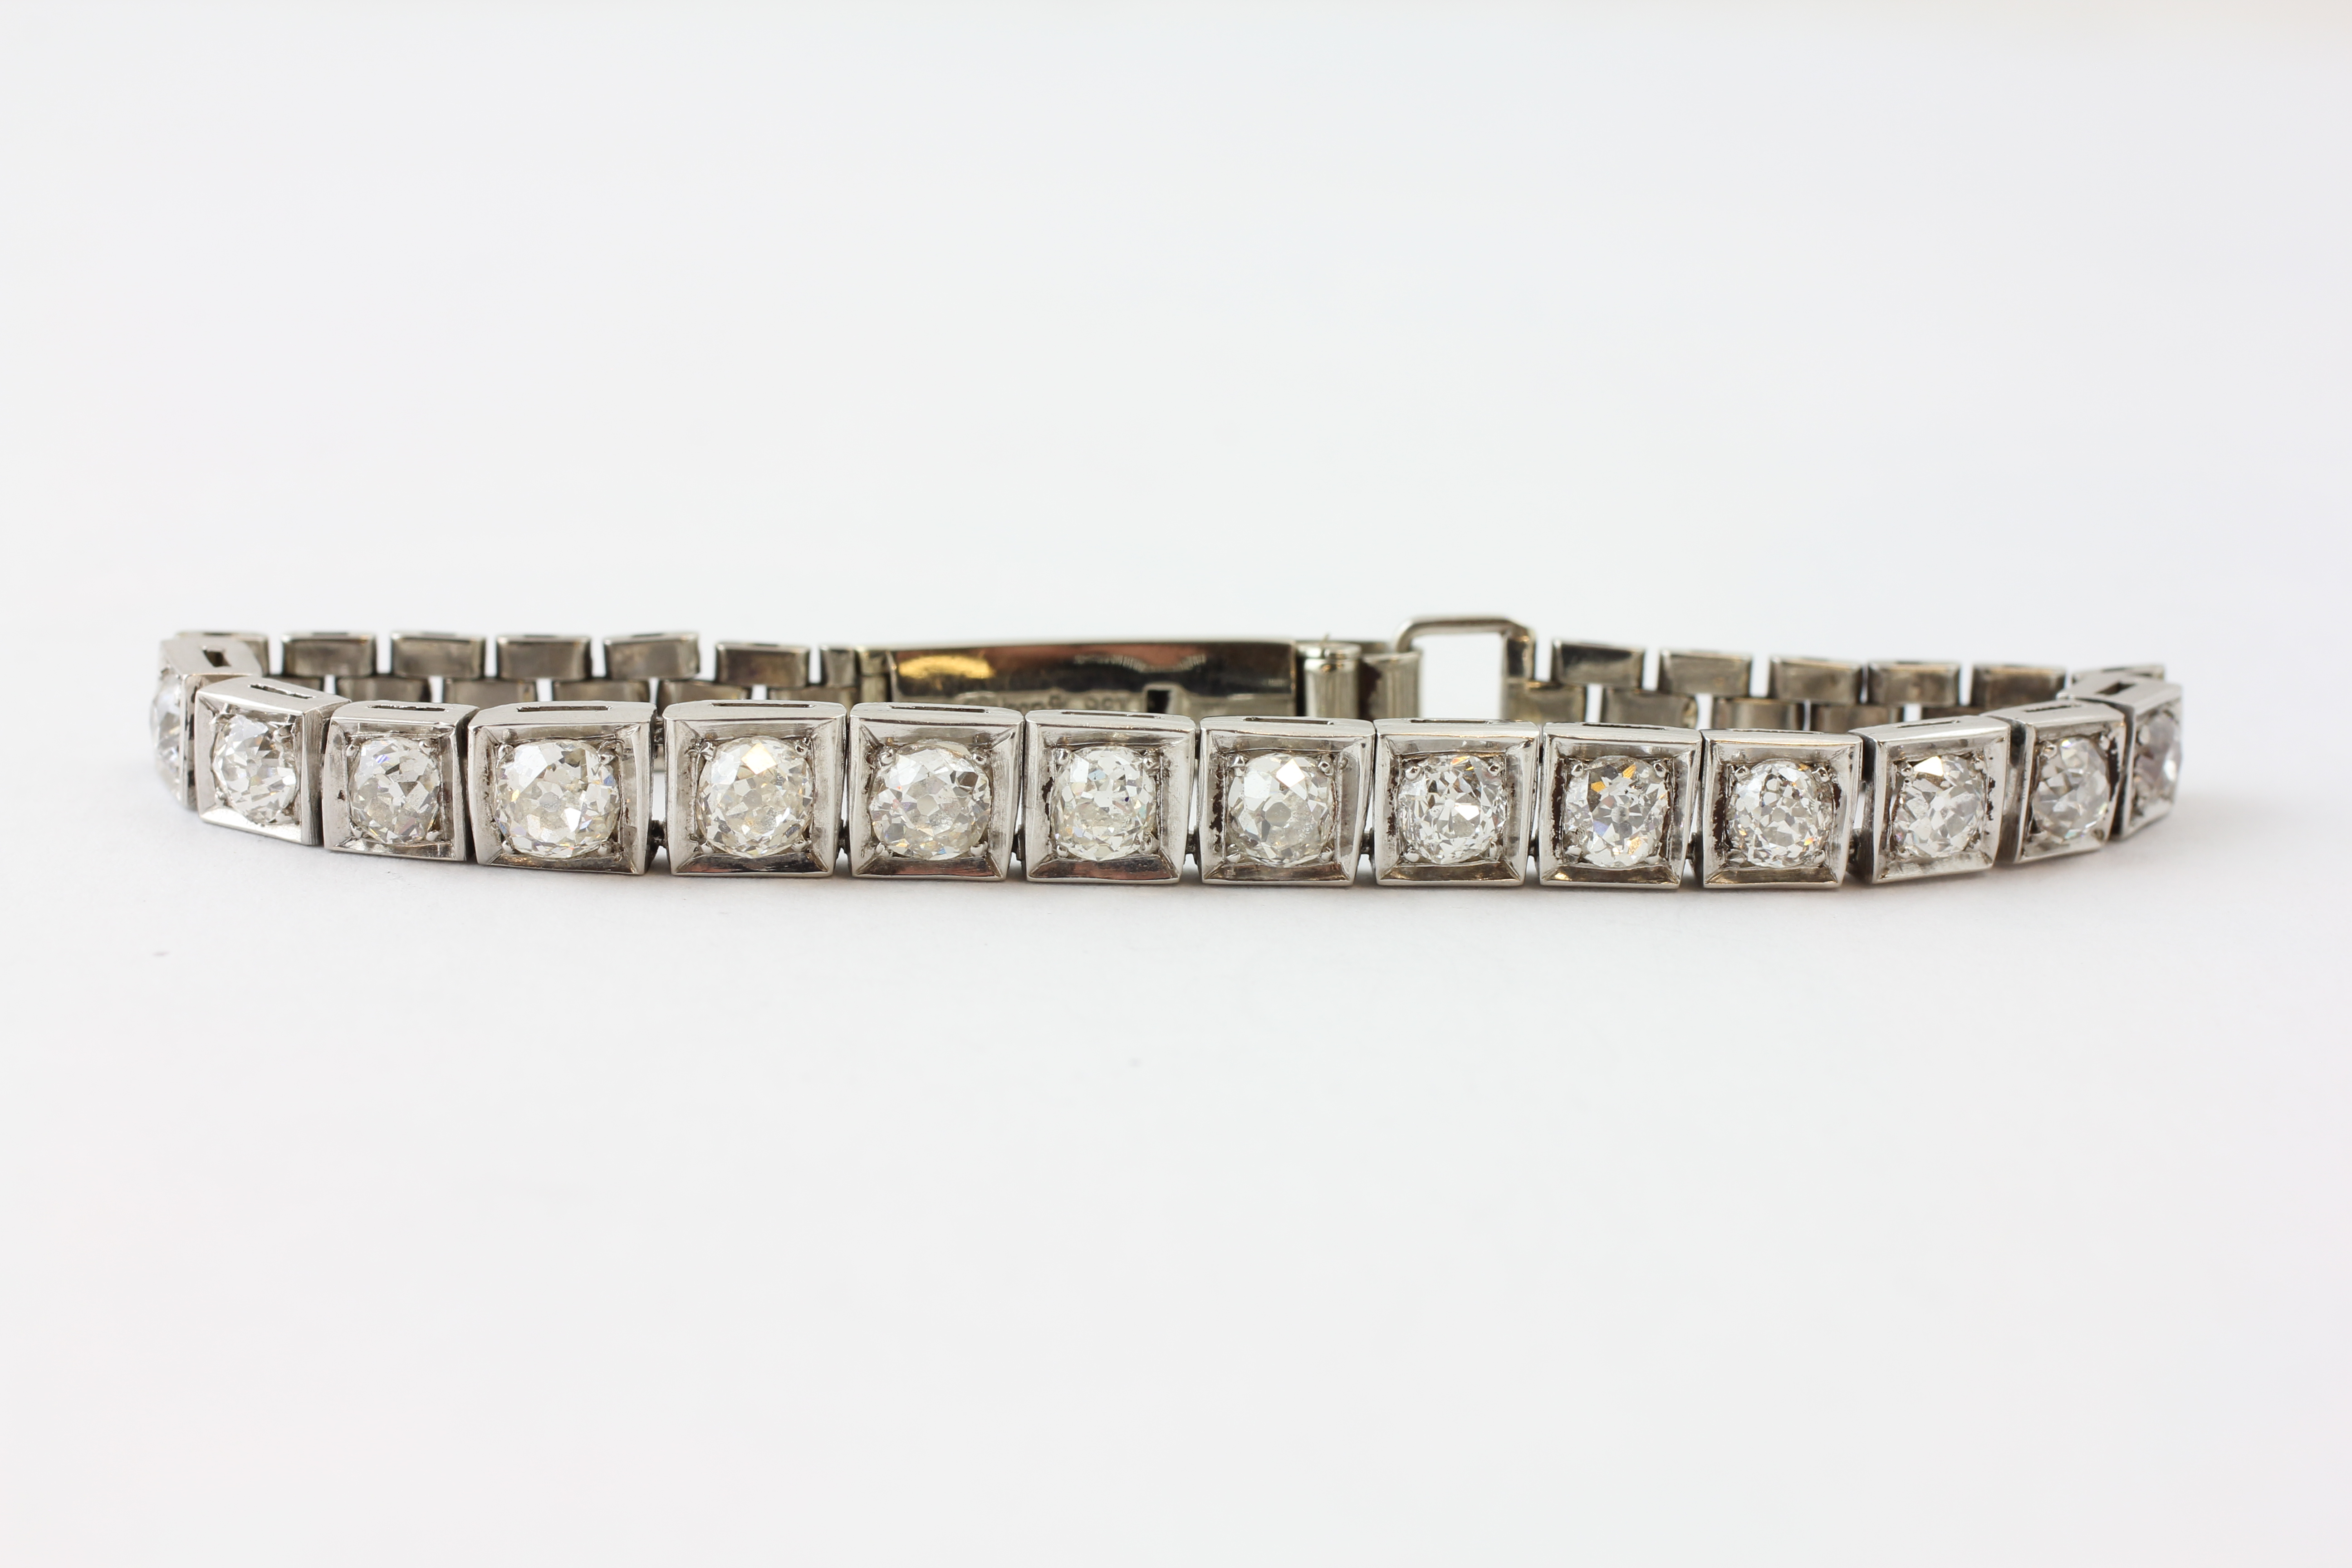 A FOURTEEN STONE DIAMOND BRACELET, THE OLD CUT STONES IN A 9CT WHITE GOLD SETTING,